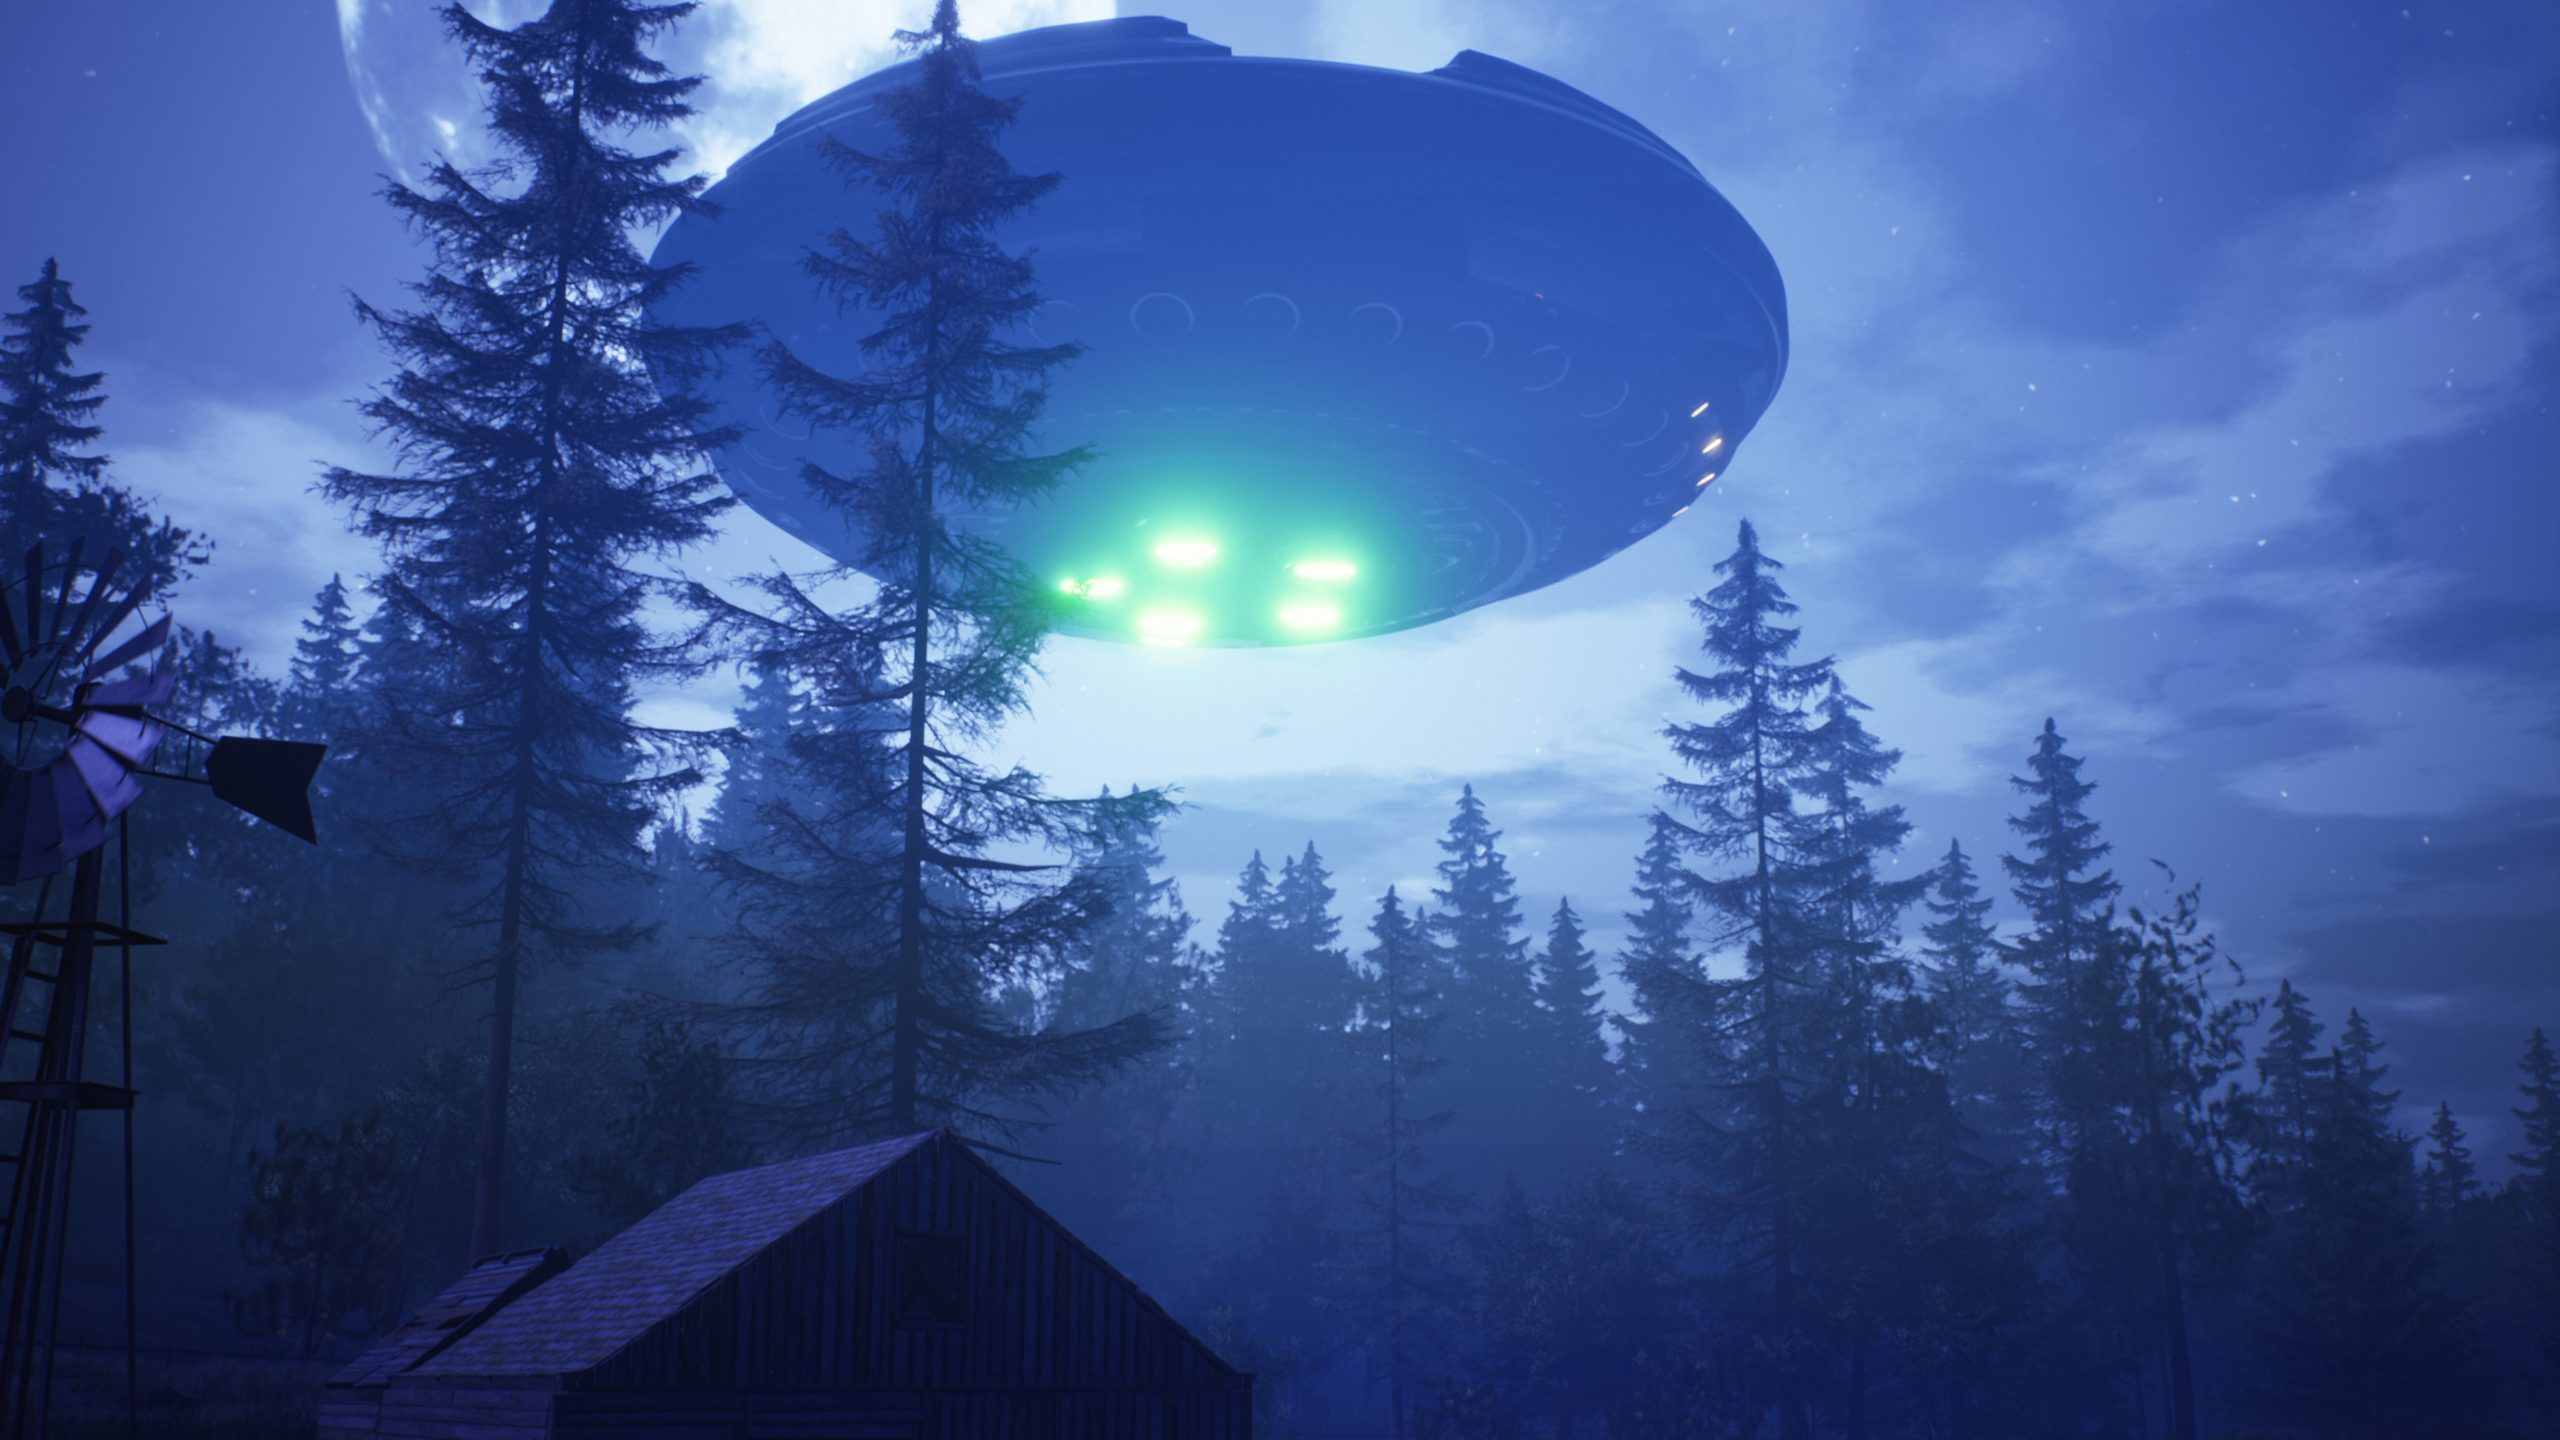 An illustration of a UFO. YAYIMAGES.